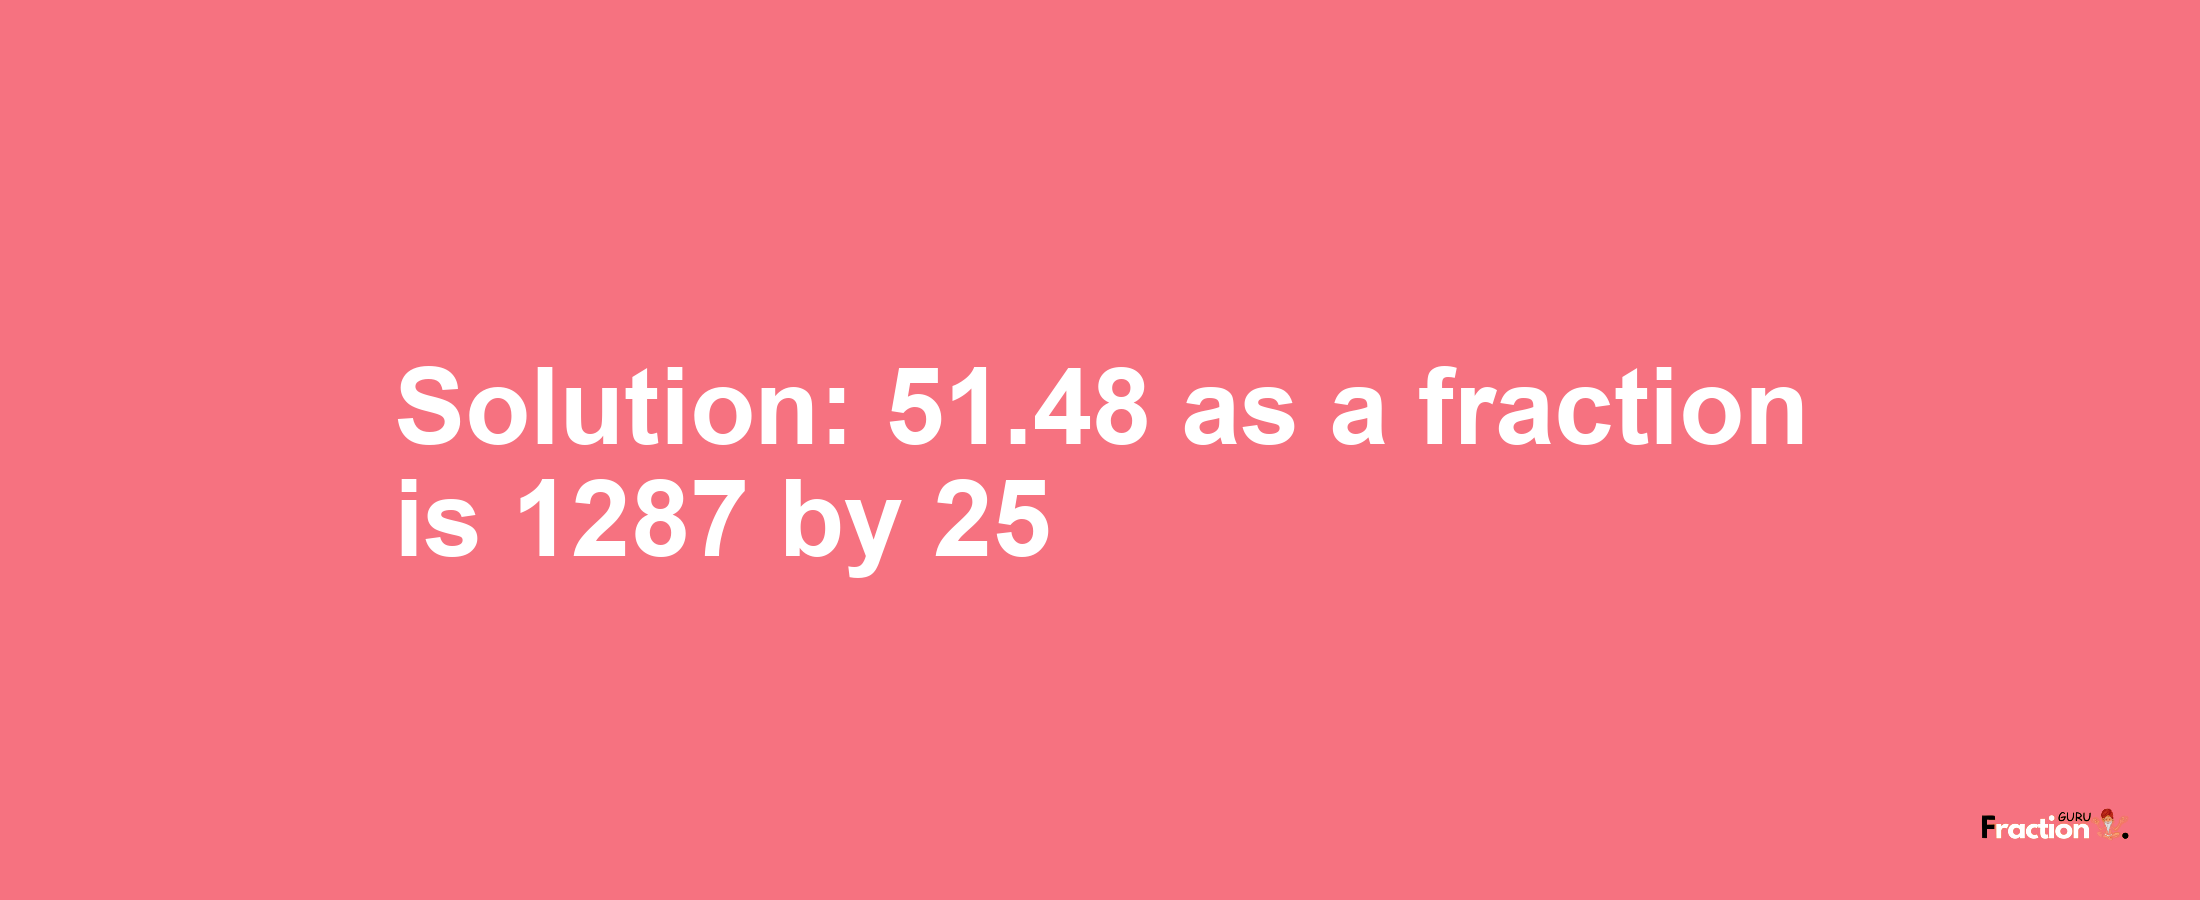 Solution:51.48 as a fraction is 1287/25